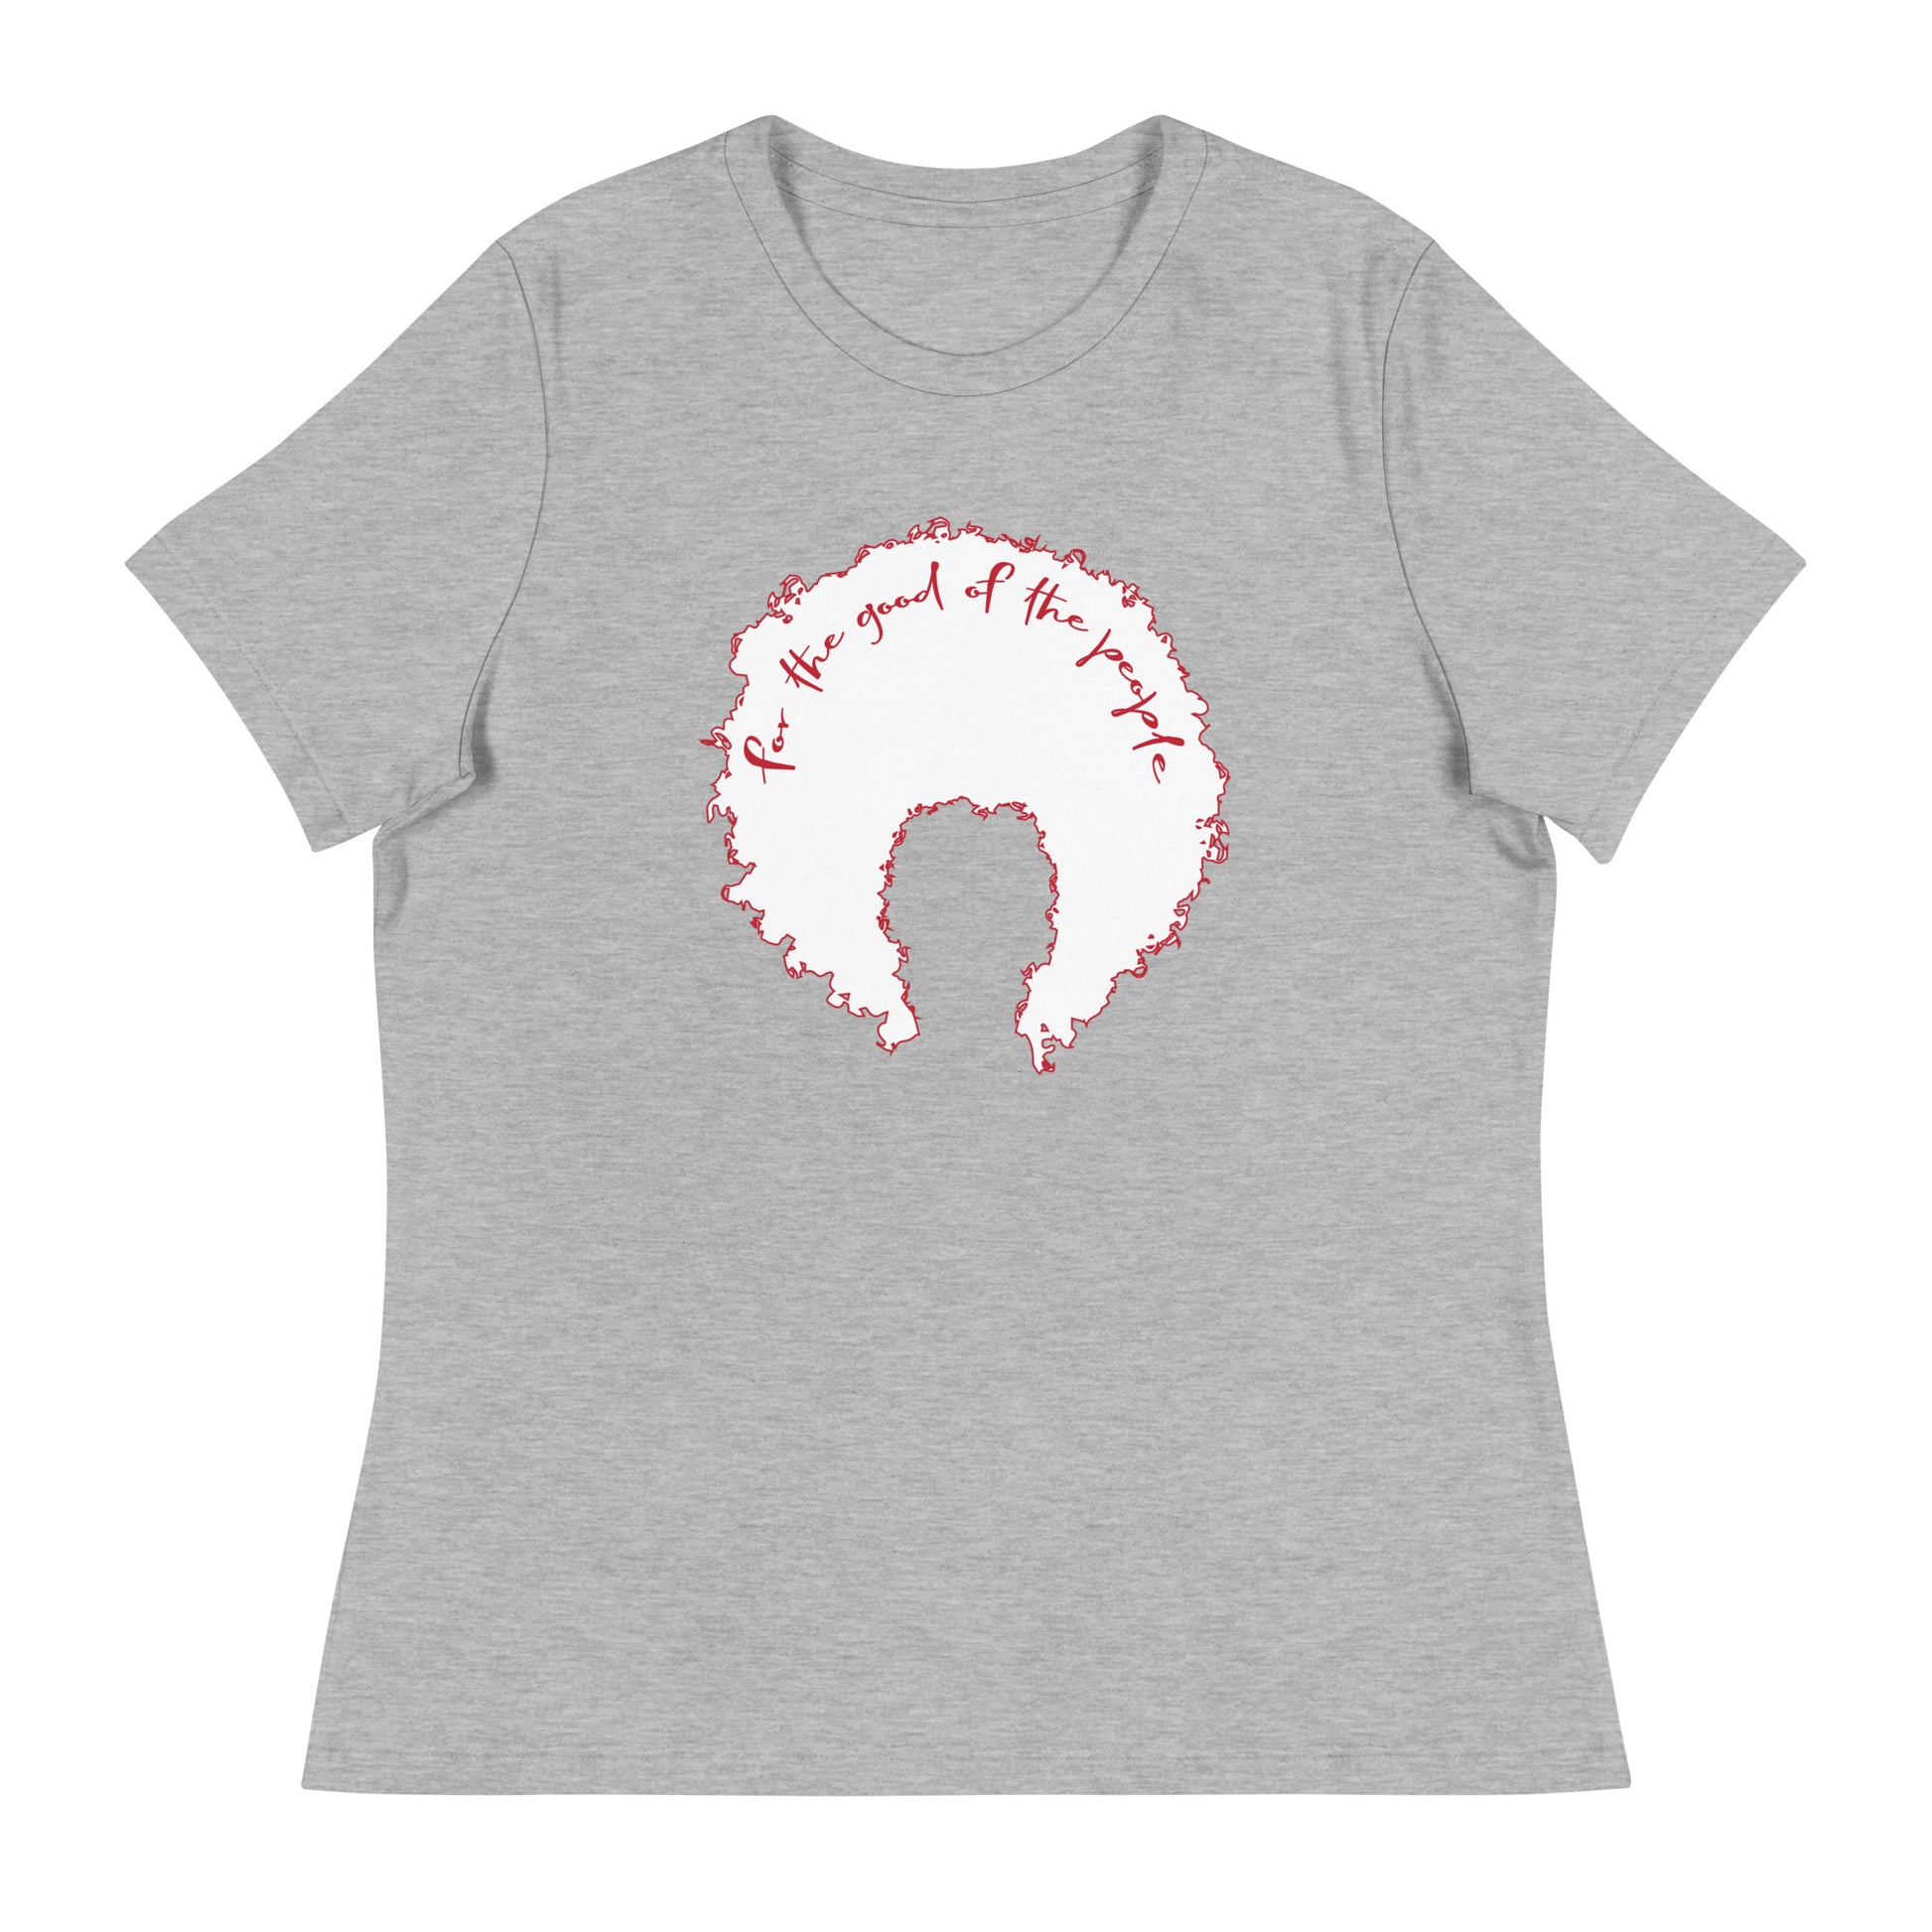 Heather gray women's tee with white afro graphic trimmed in red with for the good of the people in red on the inside top of the afro.